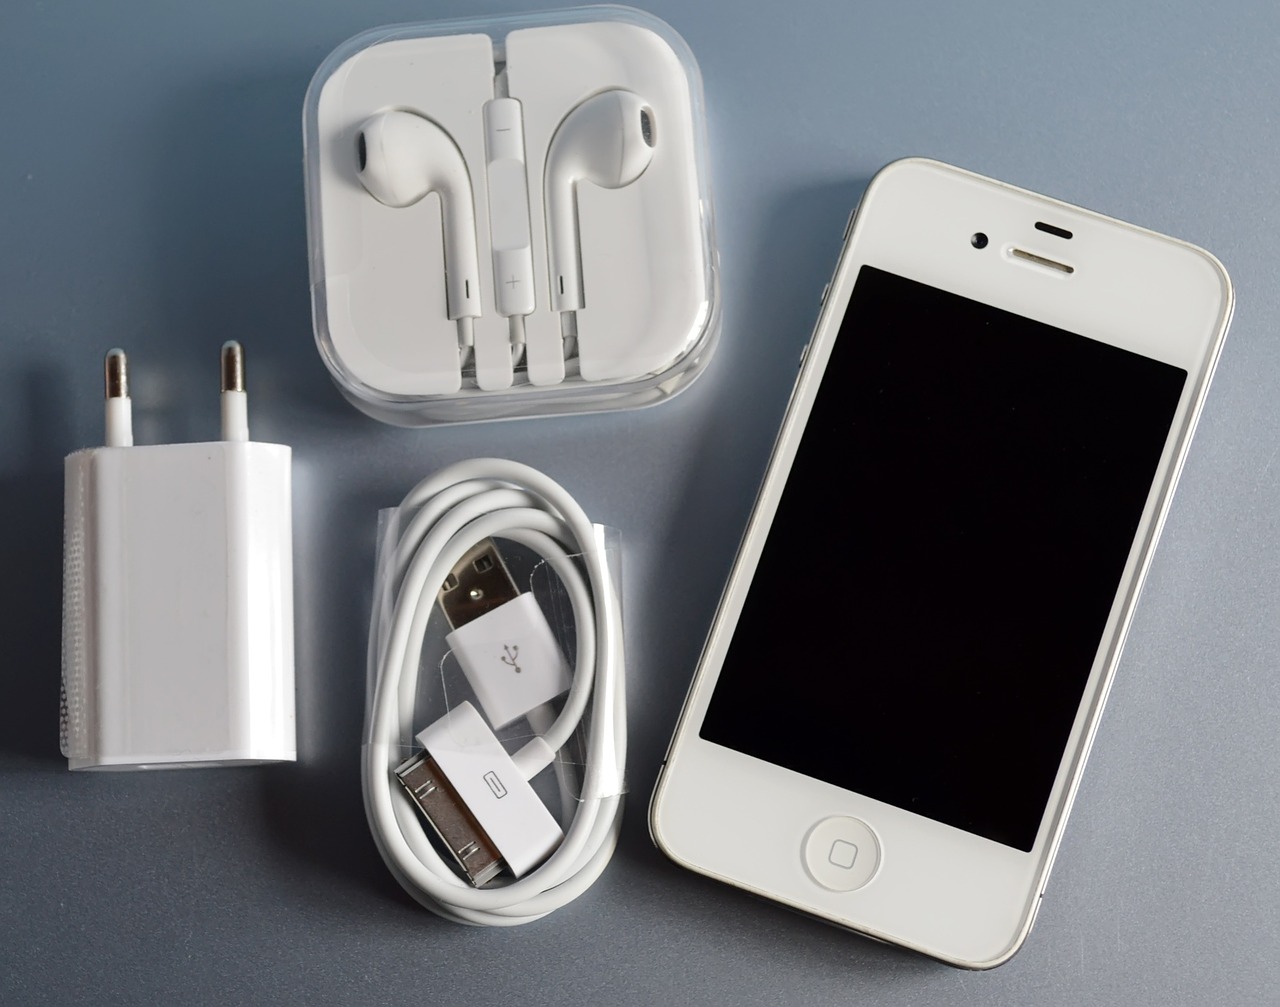 iphone 4 earphones charger free photo